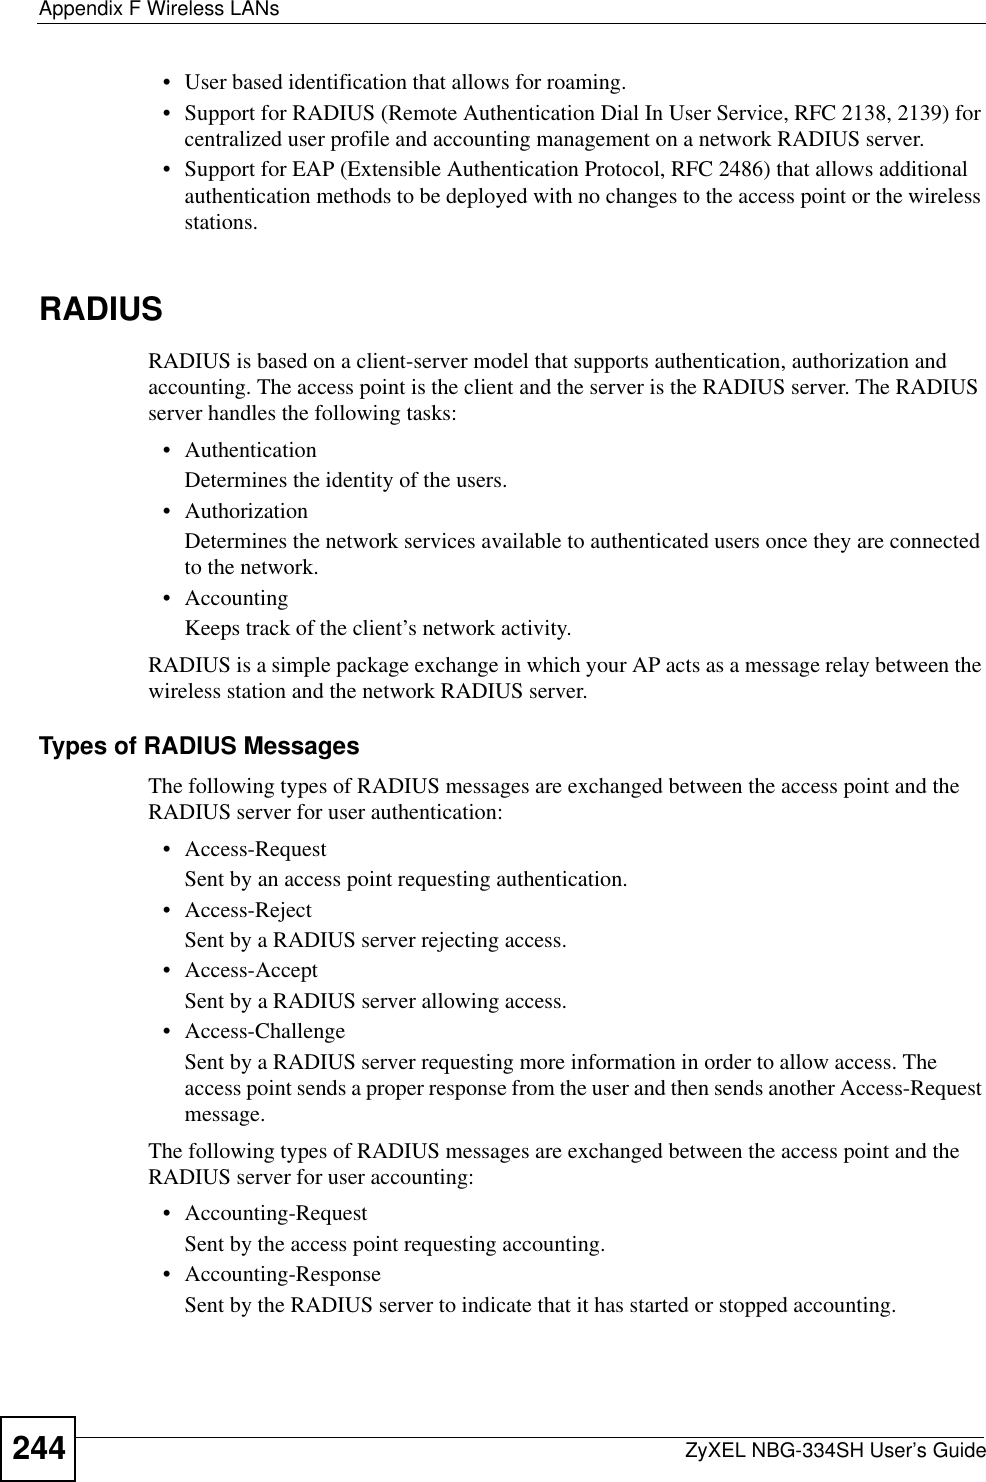 Appendix F Wireless LANsZyXEL NBG-334SH User’s Guide244• User based identification that allows for roaming.• Support for RADIUS (Remote Authentication Dial In User Service, RFC 2138, 2139) for centralized user profile and accounting management on a network RADIUS server. • Support for EAP (Extensible Authentication Protocol, RFC 2486) that allows additional authentication methods to be deployed with no changes to the access point or the wireless stations.RADIUSRADIUS is based on a client-server model that supports authentication, authorization and accounting. The access point is the client and the server is the RADIUS server. The RADIUS server handles the following tasks:• Authentication Determines the identity of the users.• AuthorizationDetermines the network services available to authenticated users once they are connected to the network.• AccountingKeeps track of the client’s network activity. RADIUS is a simple package exchange in which your AP acts as a message relay between the wireless station and the network RADIUS server. Types of RADIUS MessagesThe following types of RADIUS messages are exchanged between the access point and the RADIUS server for user authentication:• Access-RequestSent by an access point requesting authentication.• Access-RejectSent by a RADIUS server rejecting access.• Access-AcceptSent by a RADIUS server allowing access. • Access-ChallengeSent by a RADIUS server requesting more information in order to allow access. The access point sends a proper response from the user and then sends another Access-Request message. The following types of RADIUS messages are exchanged between the access point and the RADIUS server for user accounting:• Accounting-RequestSent by the access point requesting accounting.• Accounting-ResponseSent by the RADIUS server to indicate that it has started or stopped accounting. 